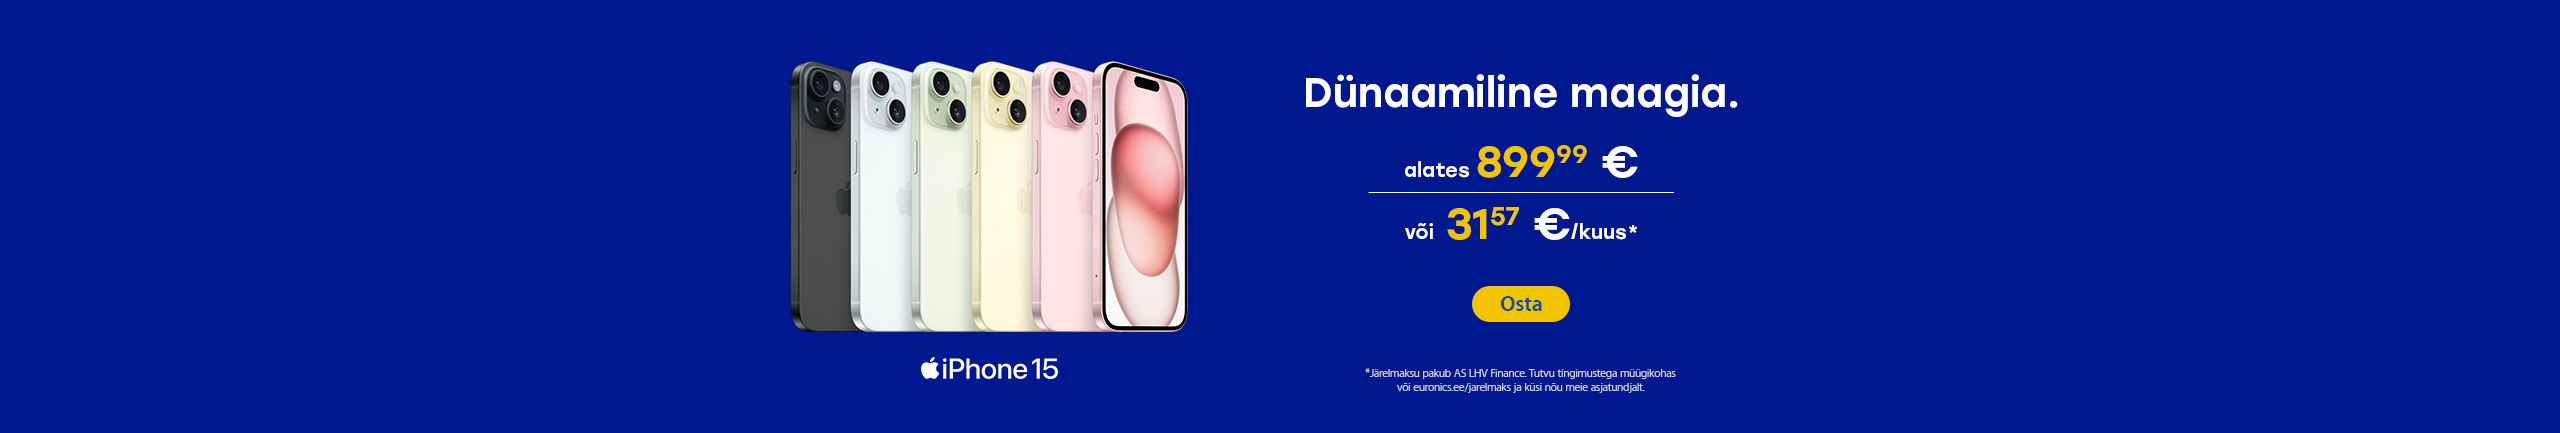 
Apple iPhone 15 starting from 899,99€
